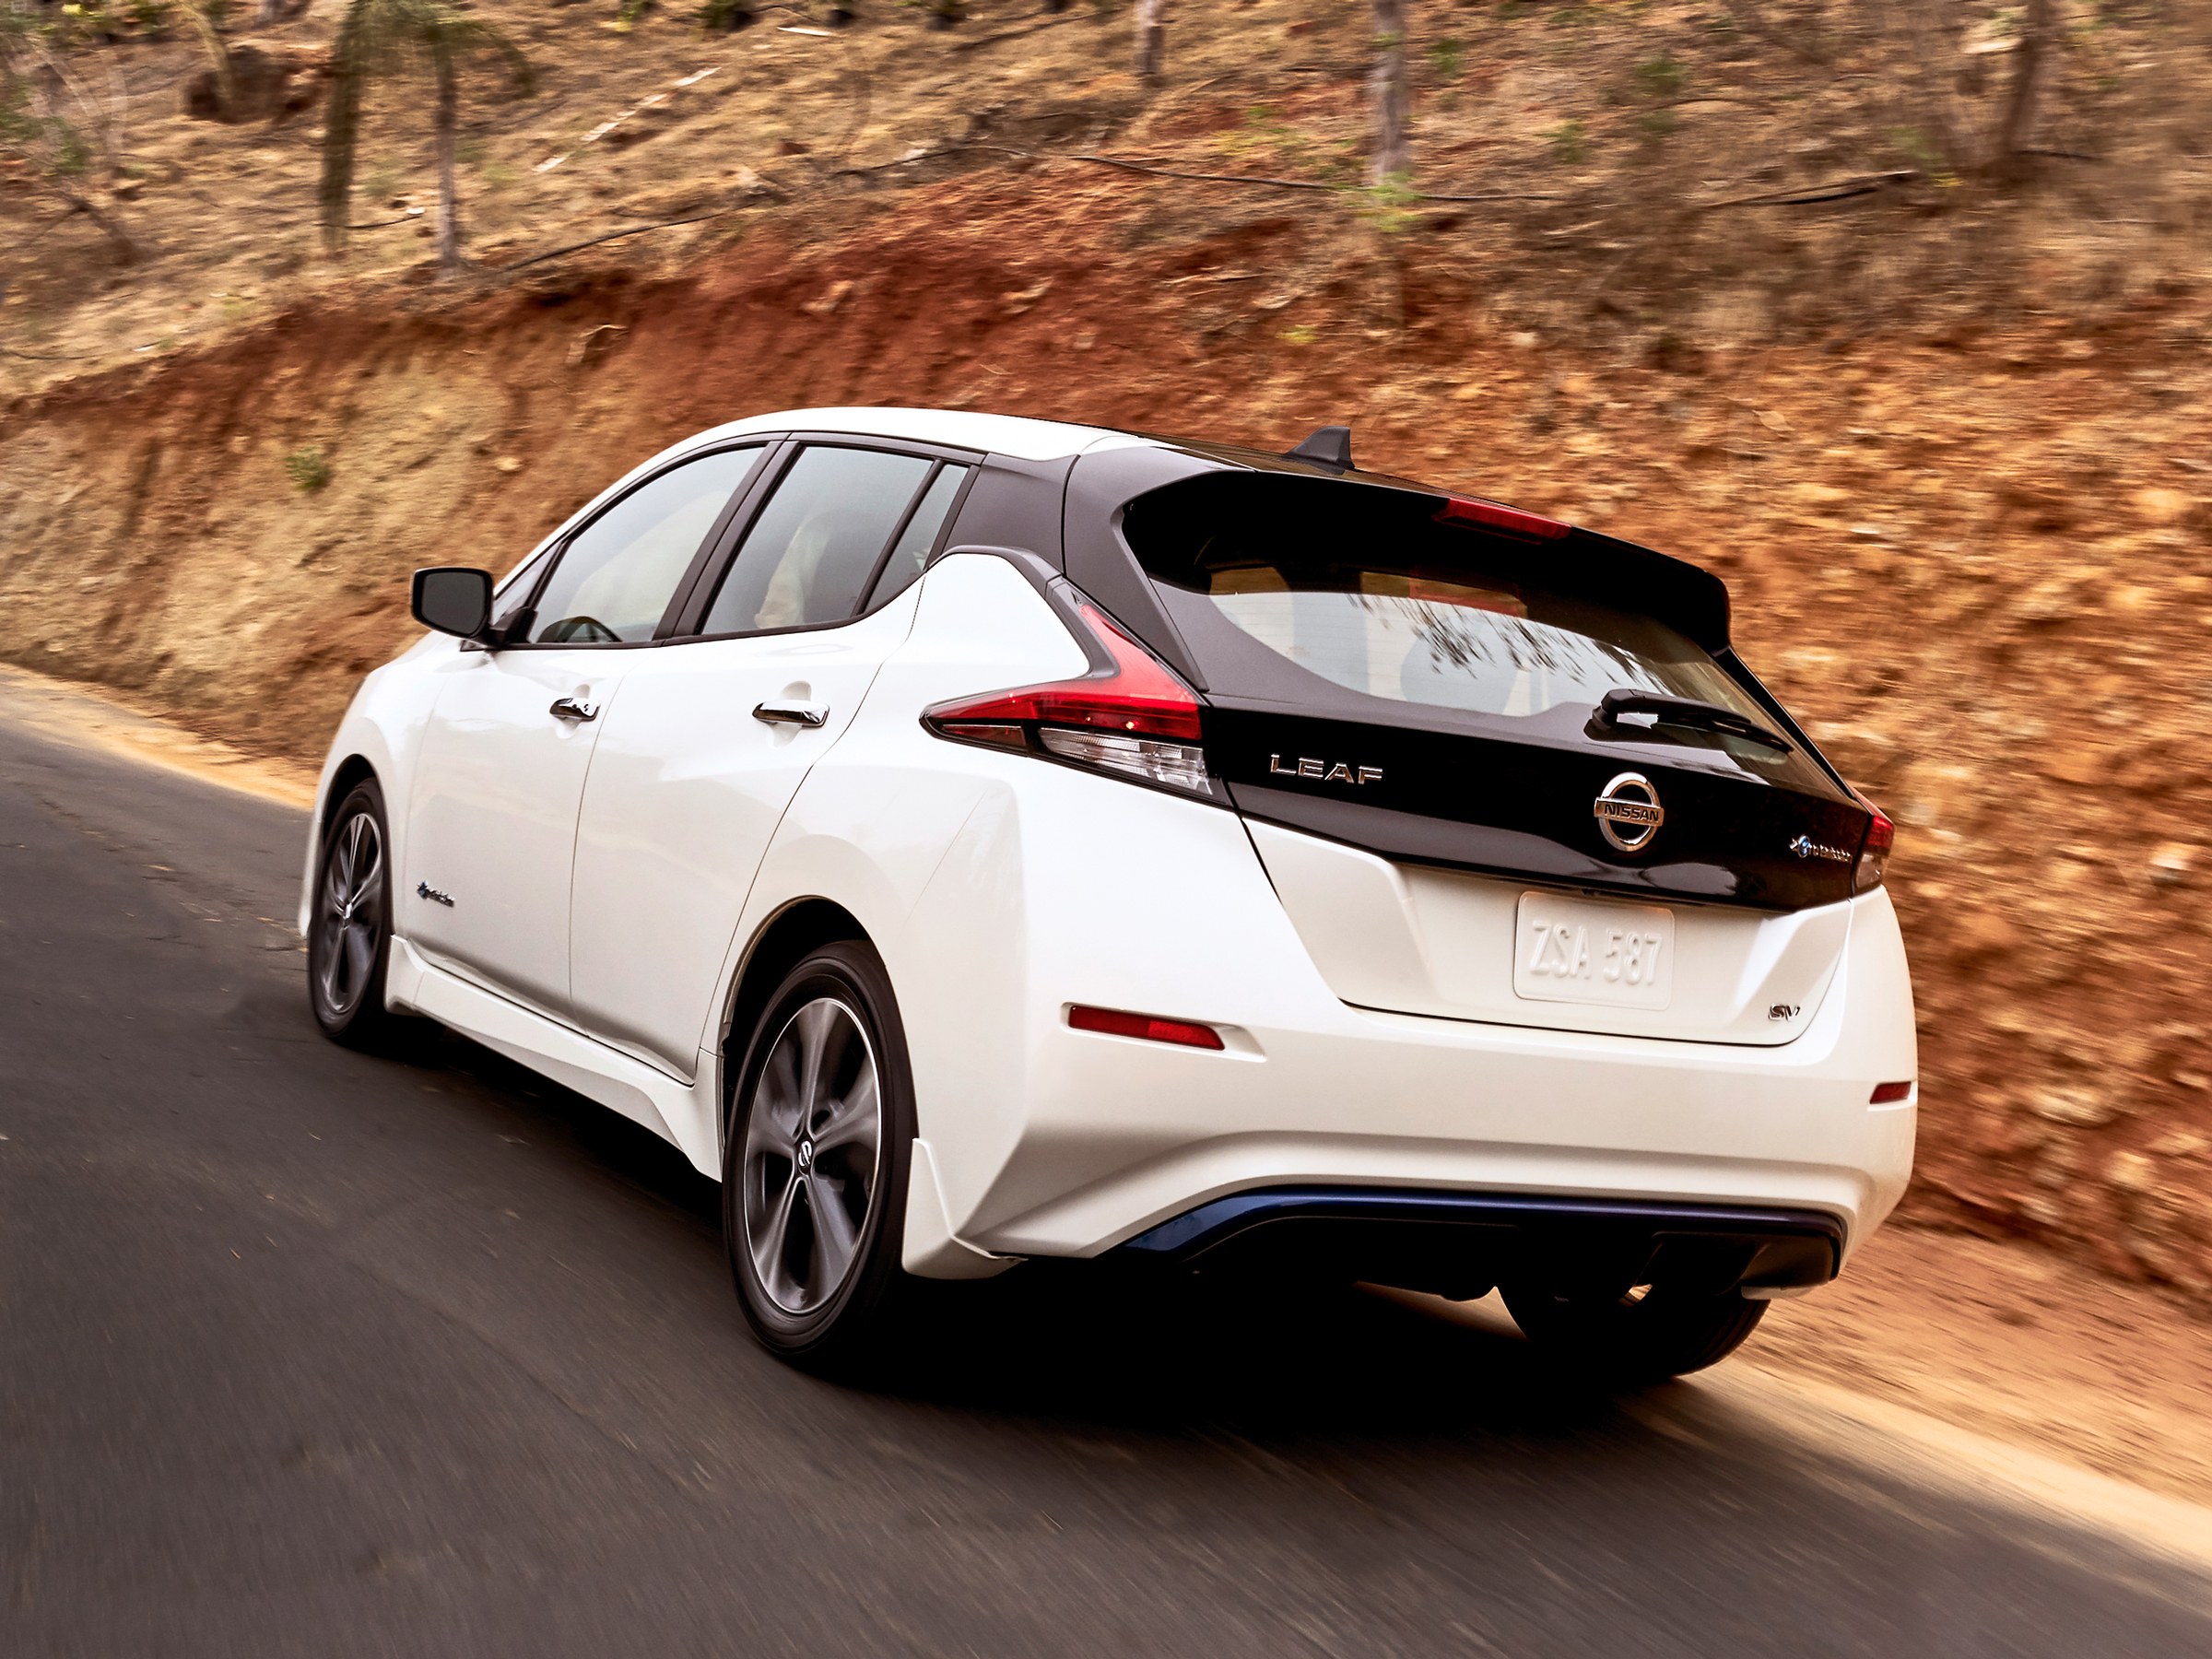 Nissan's 2018 Leaf Offers 150 Miles of Range for $30,000 | WIRED